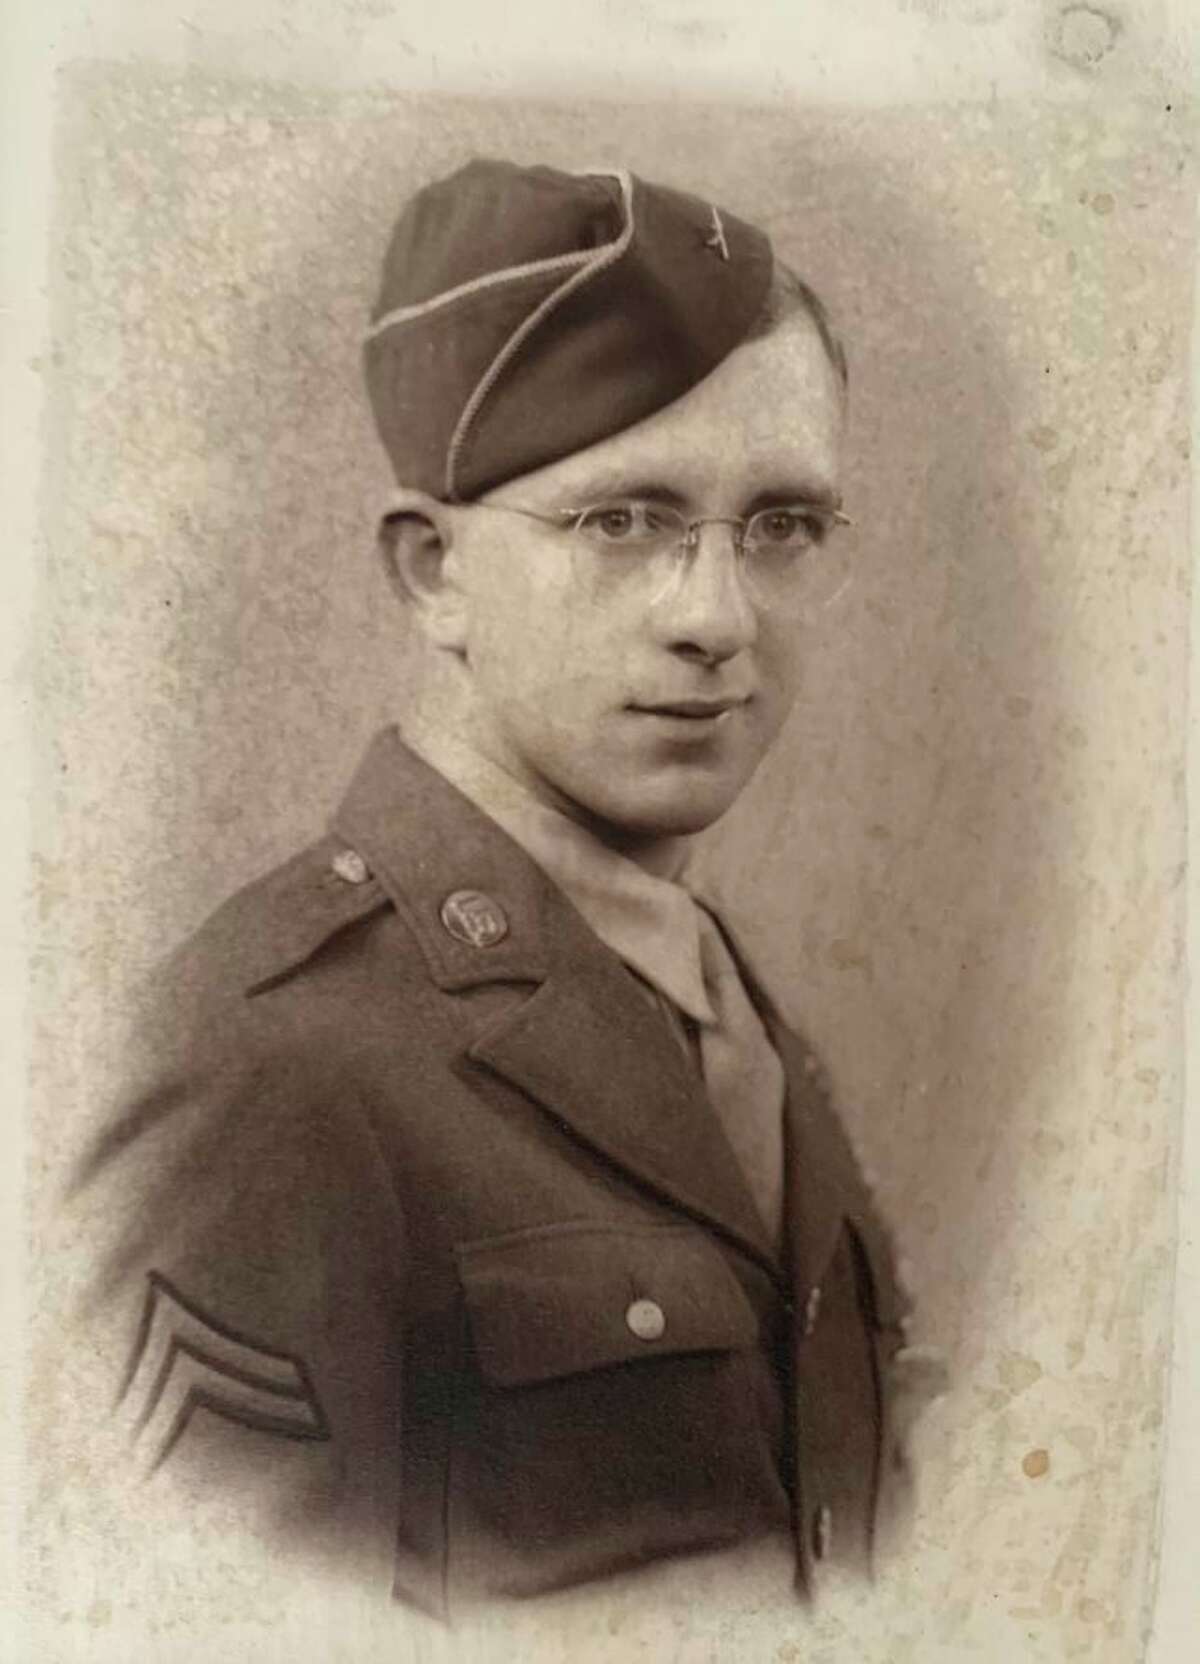 Sergeant Edwin O. Pochert was striped of his stripes after in incident in WWII, with the promise to have them reinstated. After receiving an honorable discharge shortly after, following an injury, his rank remained recorded as a Private First Class. His work to reinstate his stripes was passed down to his daughter after his passing in 2012. (Courtesy Photo)